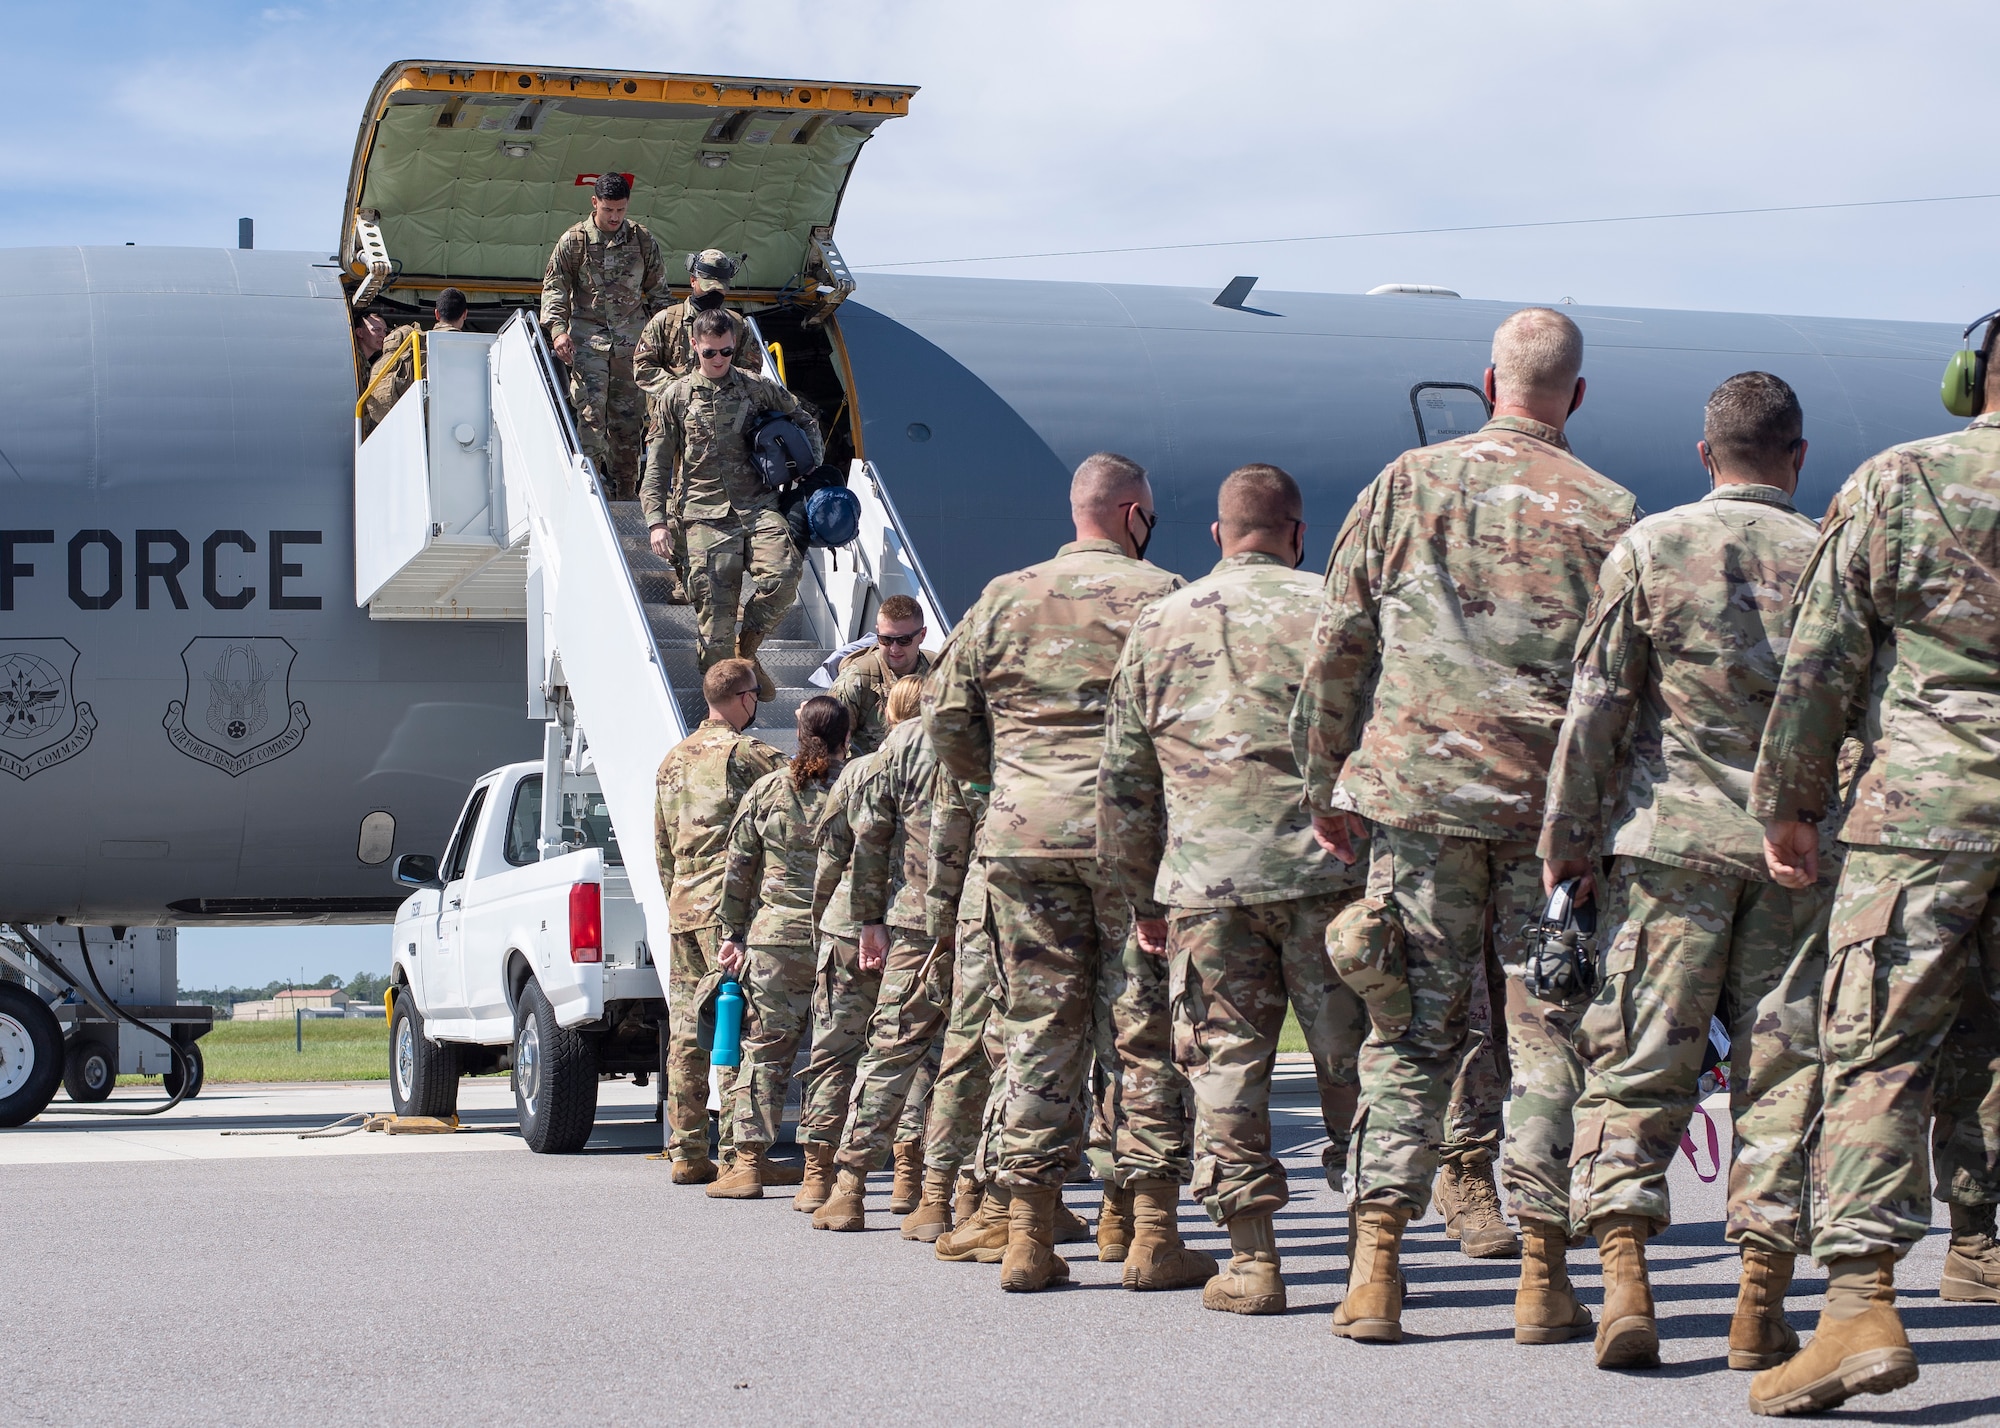 Airmen from the 6th Maintenance Group are greeted by their wingmen after returning from deployment at MacDill Air Force Base, Florida, Sept. 27, 2021.